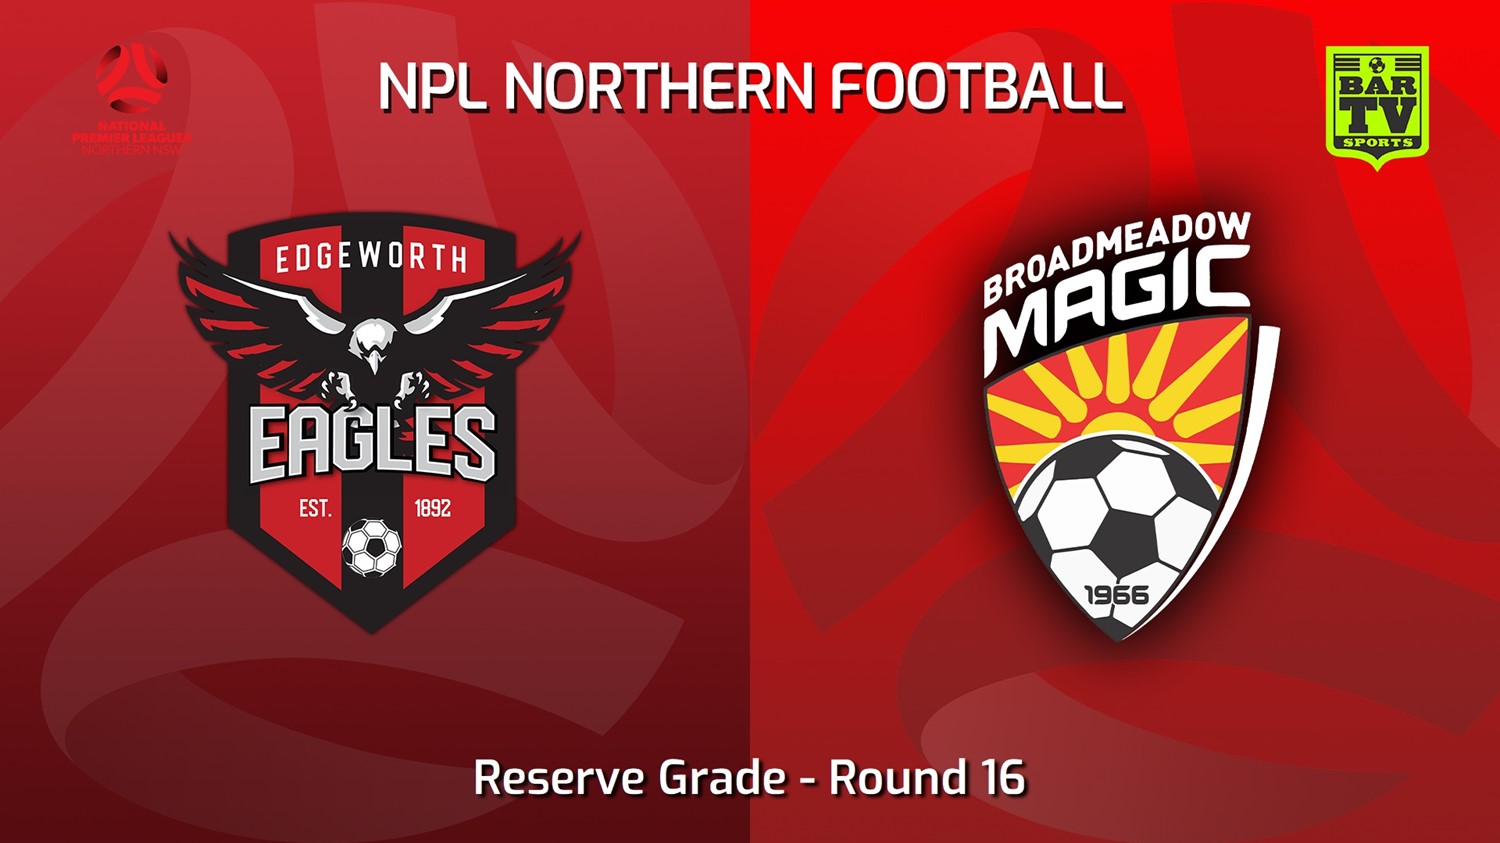 220625-NNSW NPLM Res Round 16 - Edgeworth Eagles Res v Broadmeadow Magic Res Slate Image